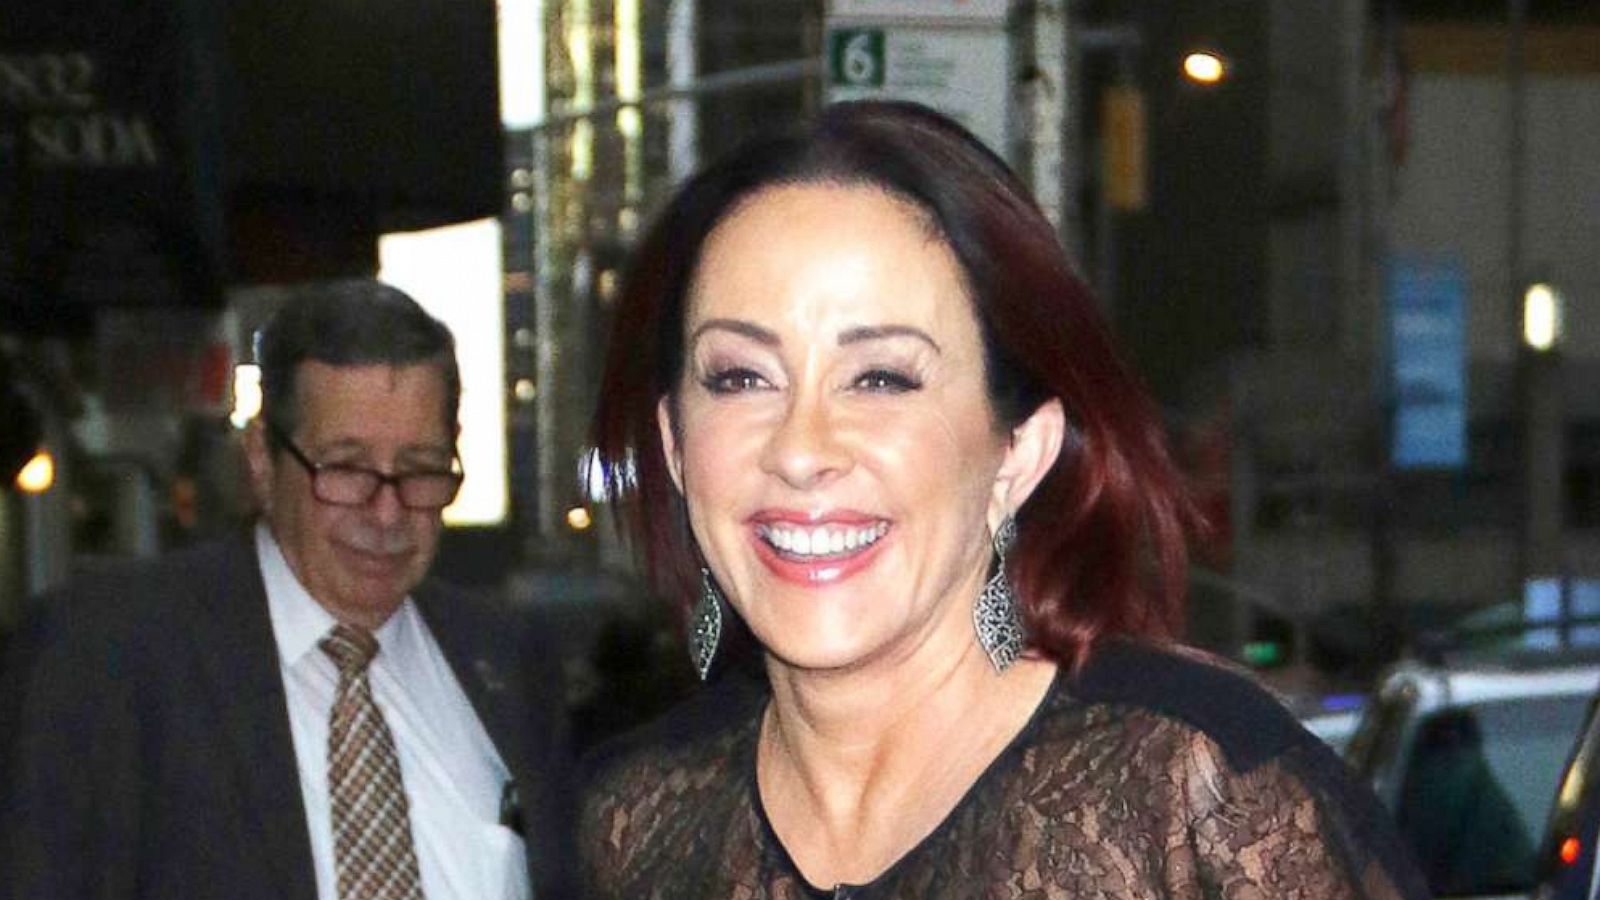 Patricia Heaton shares video message celebrating 3 years of sobriety - Good  Morning America